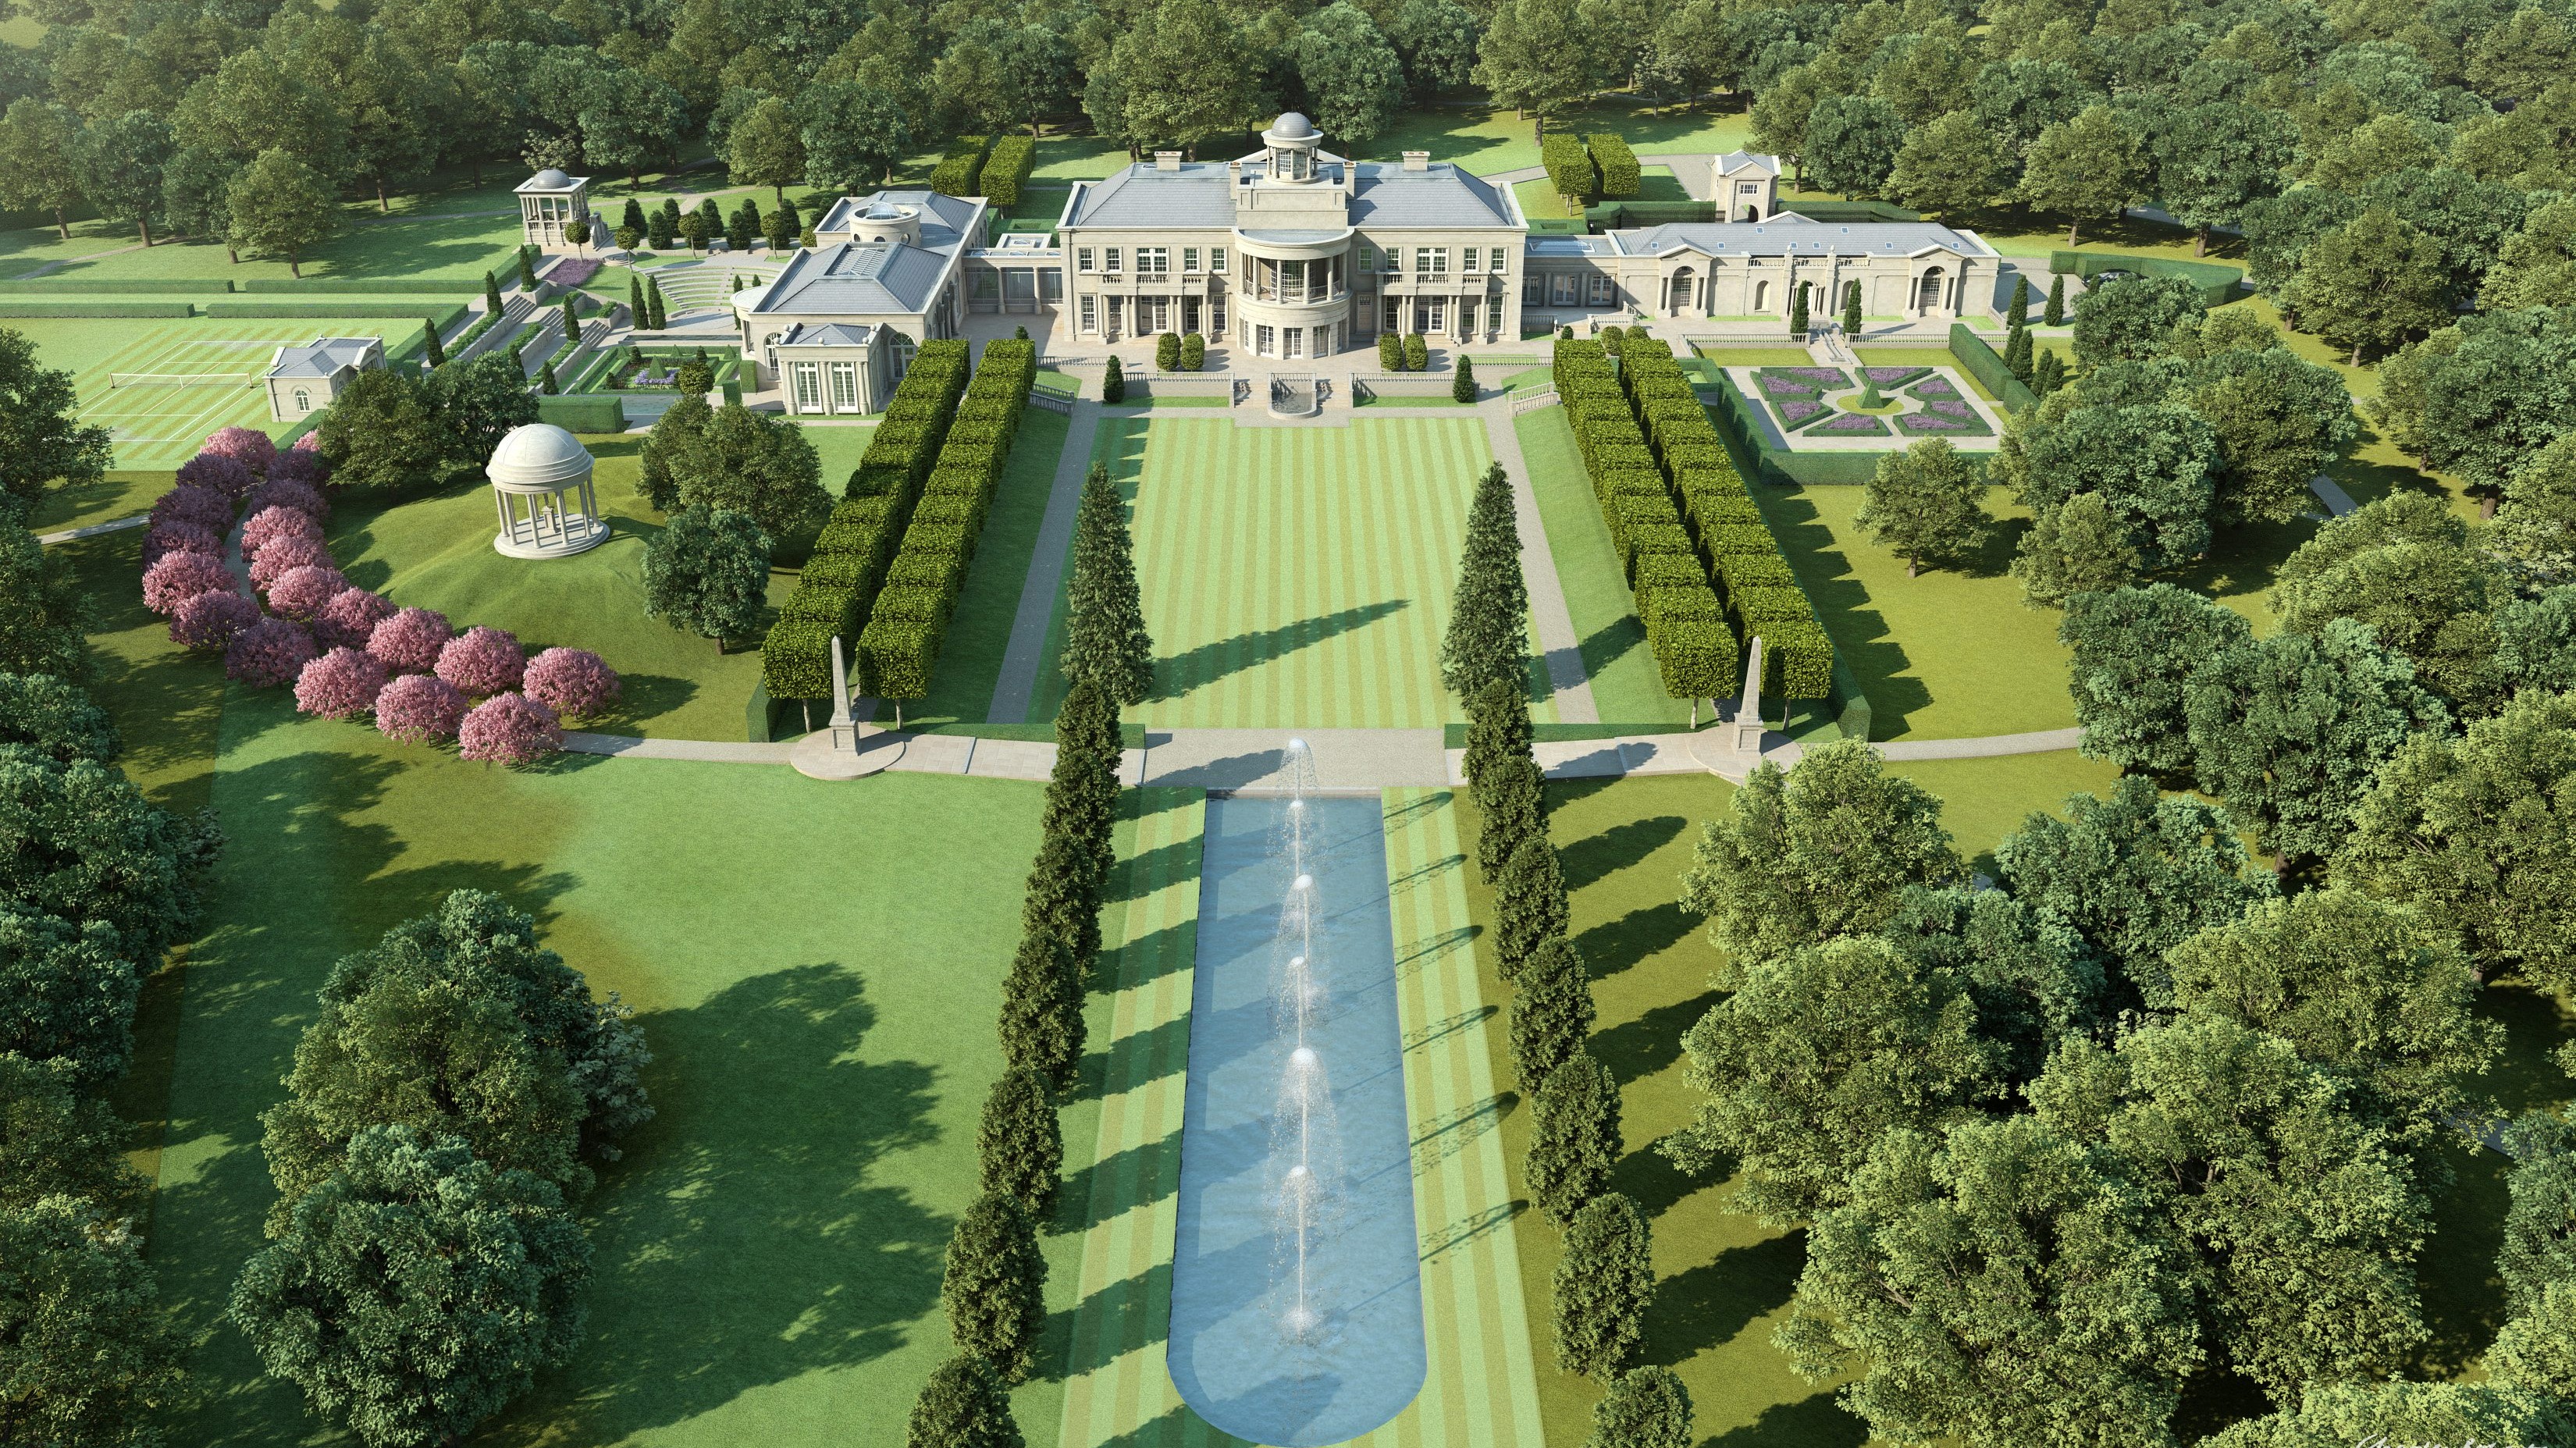 Is This Britains Most Extravagant New Build Luxury £60m Mega Mansion 45 Times The Size Of An 